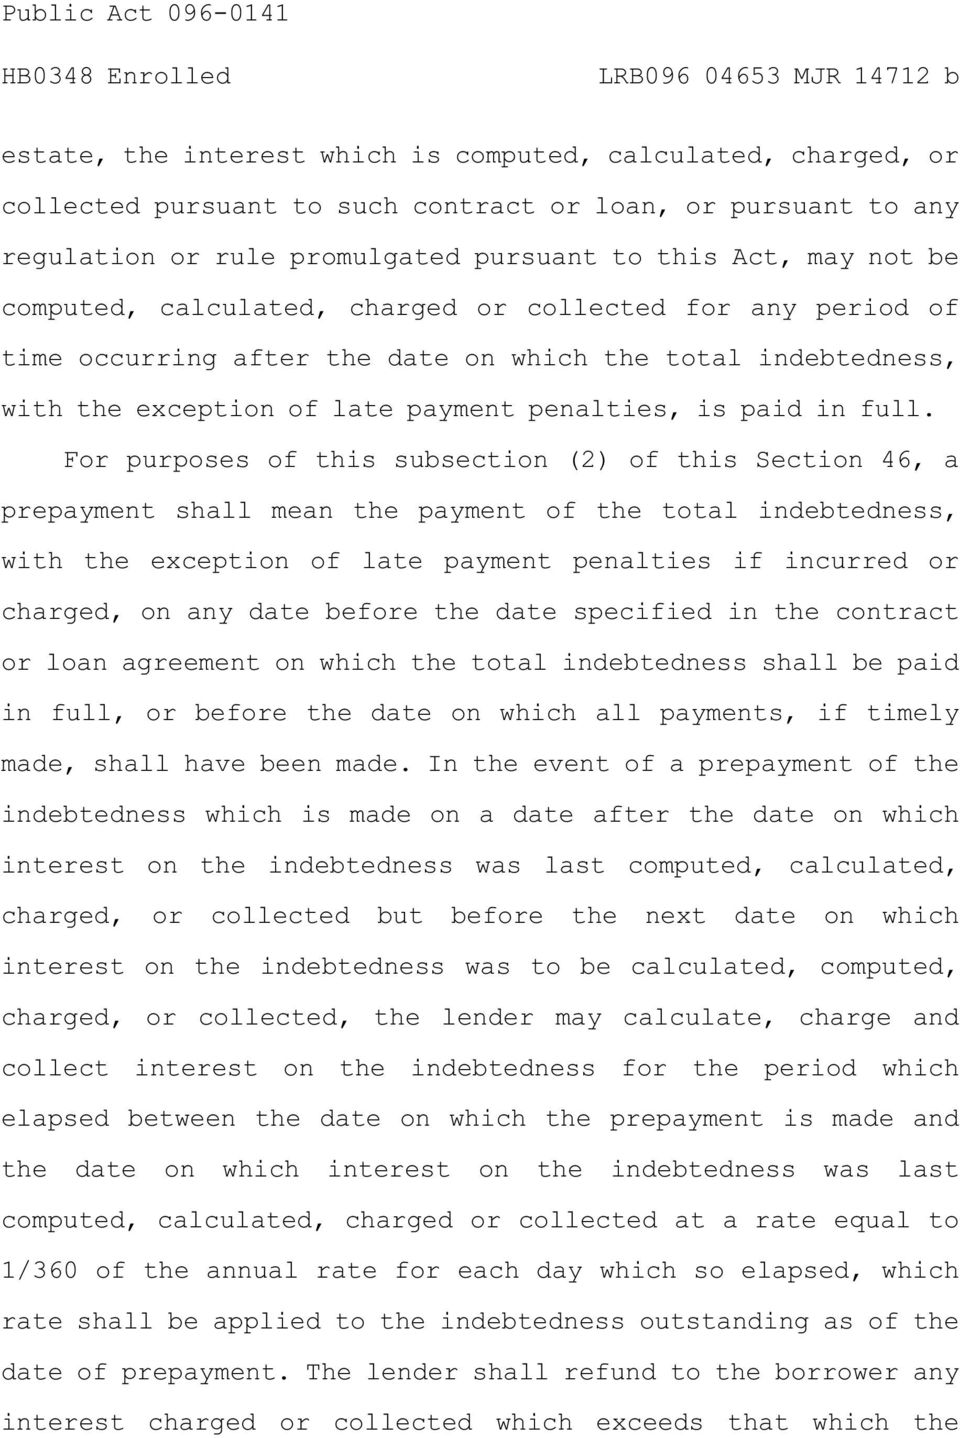 For purposes of this subsection (2) of this Section 46, a prepayment shall mean the payment of the total indebtedness, with the exception of late payment penalties if incurred or charged, on any date